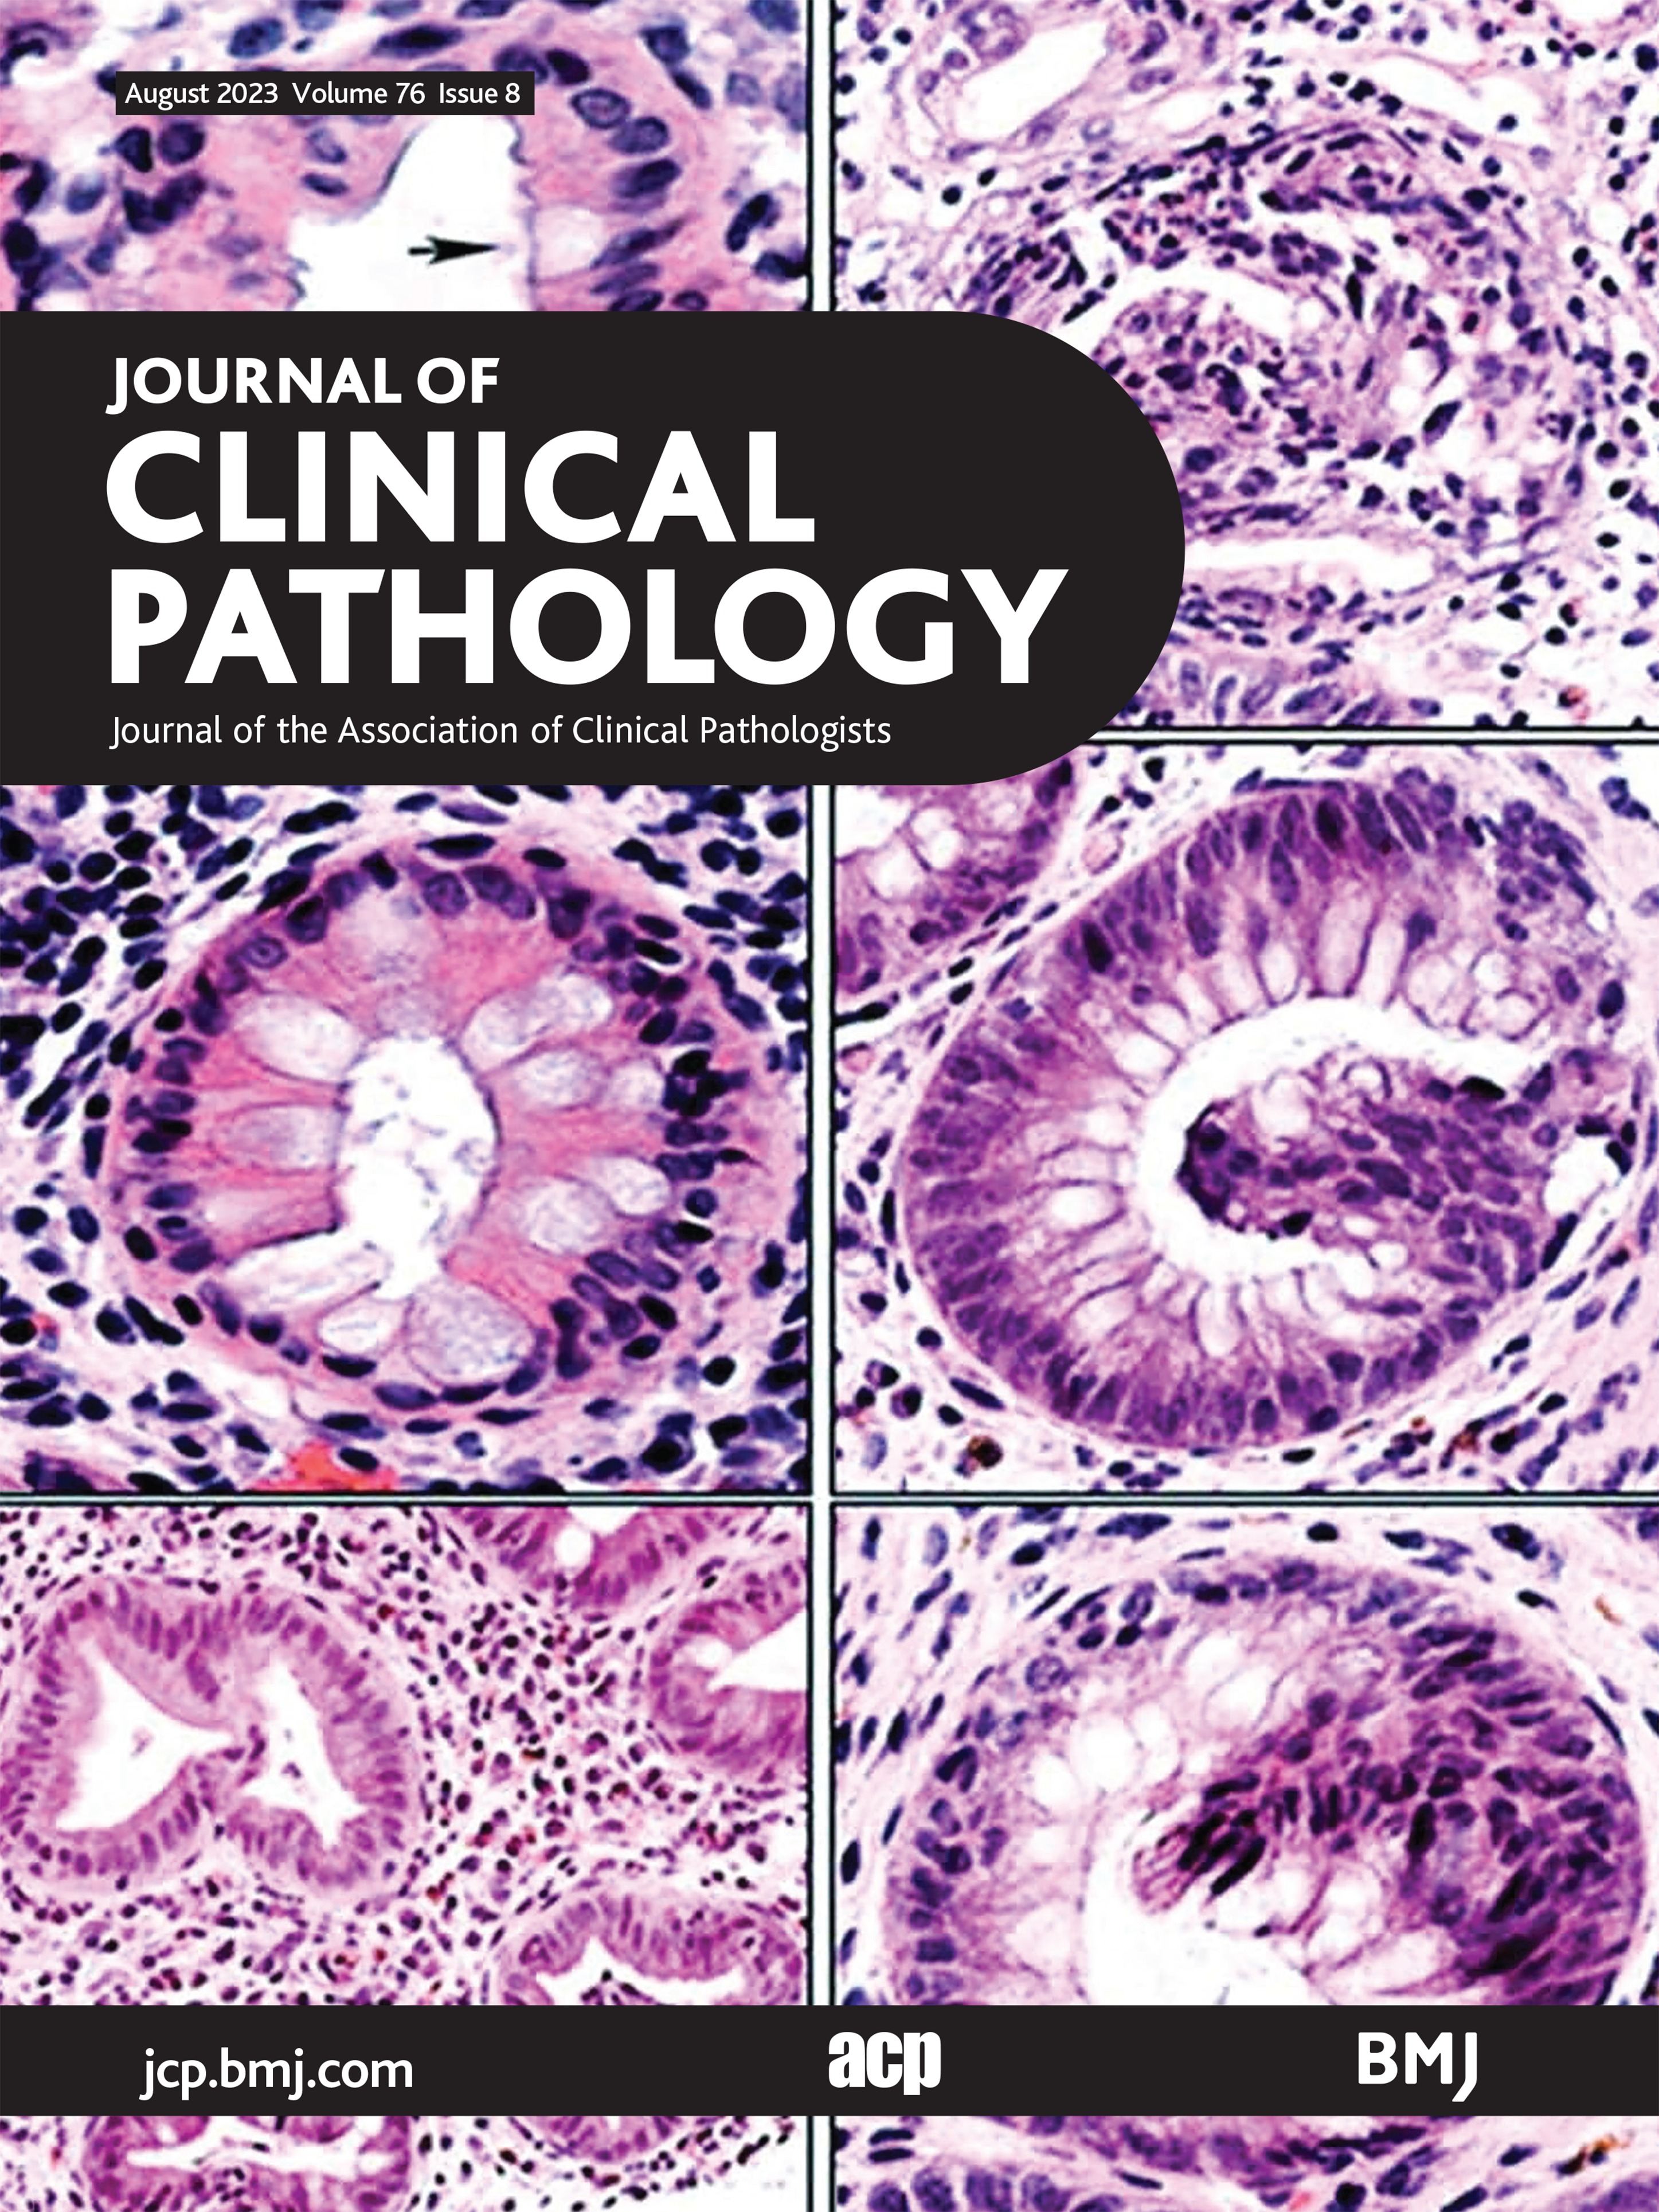 Factors predicting BRCA1/2 pathogenic variants in patients with ovarian cancer: a systematic review with meta-analysis